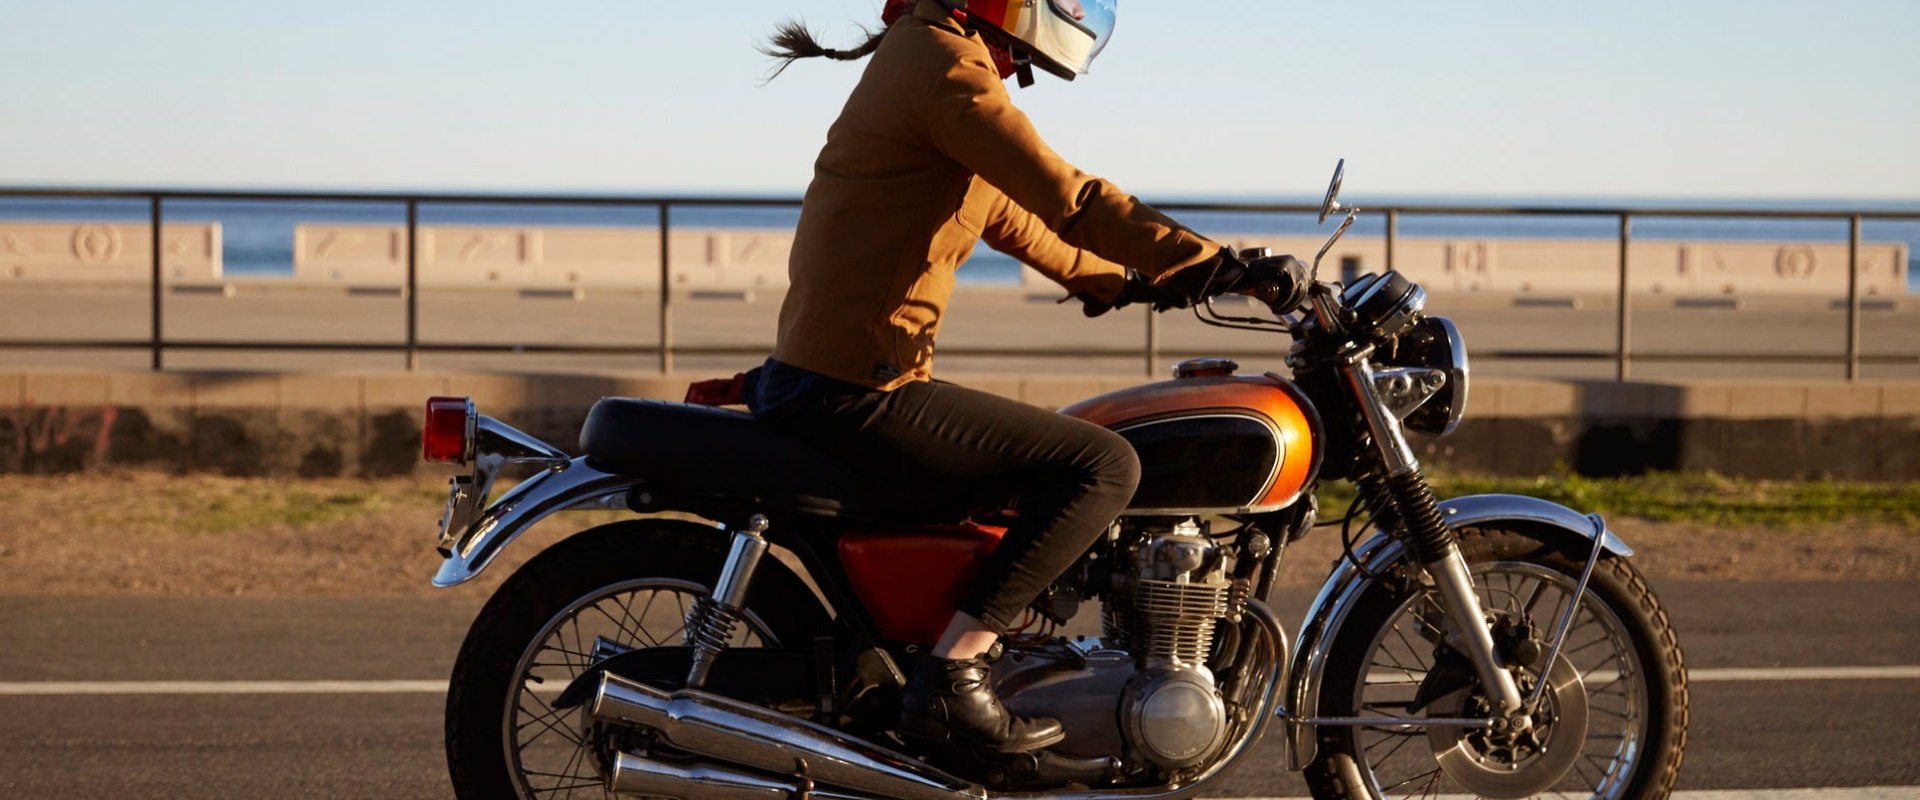 How Much Does Motorcycle Insurance Cost For A 16 Year Old In California?